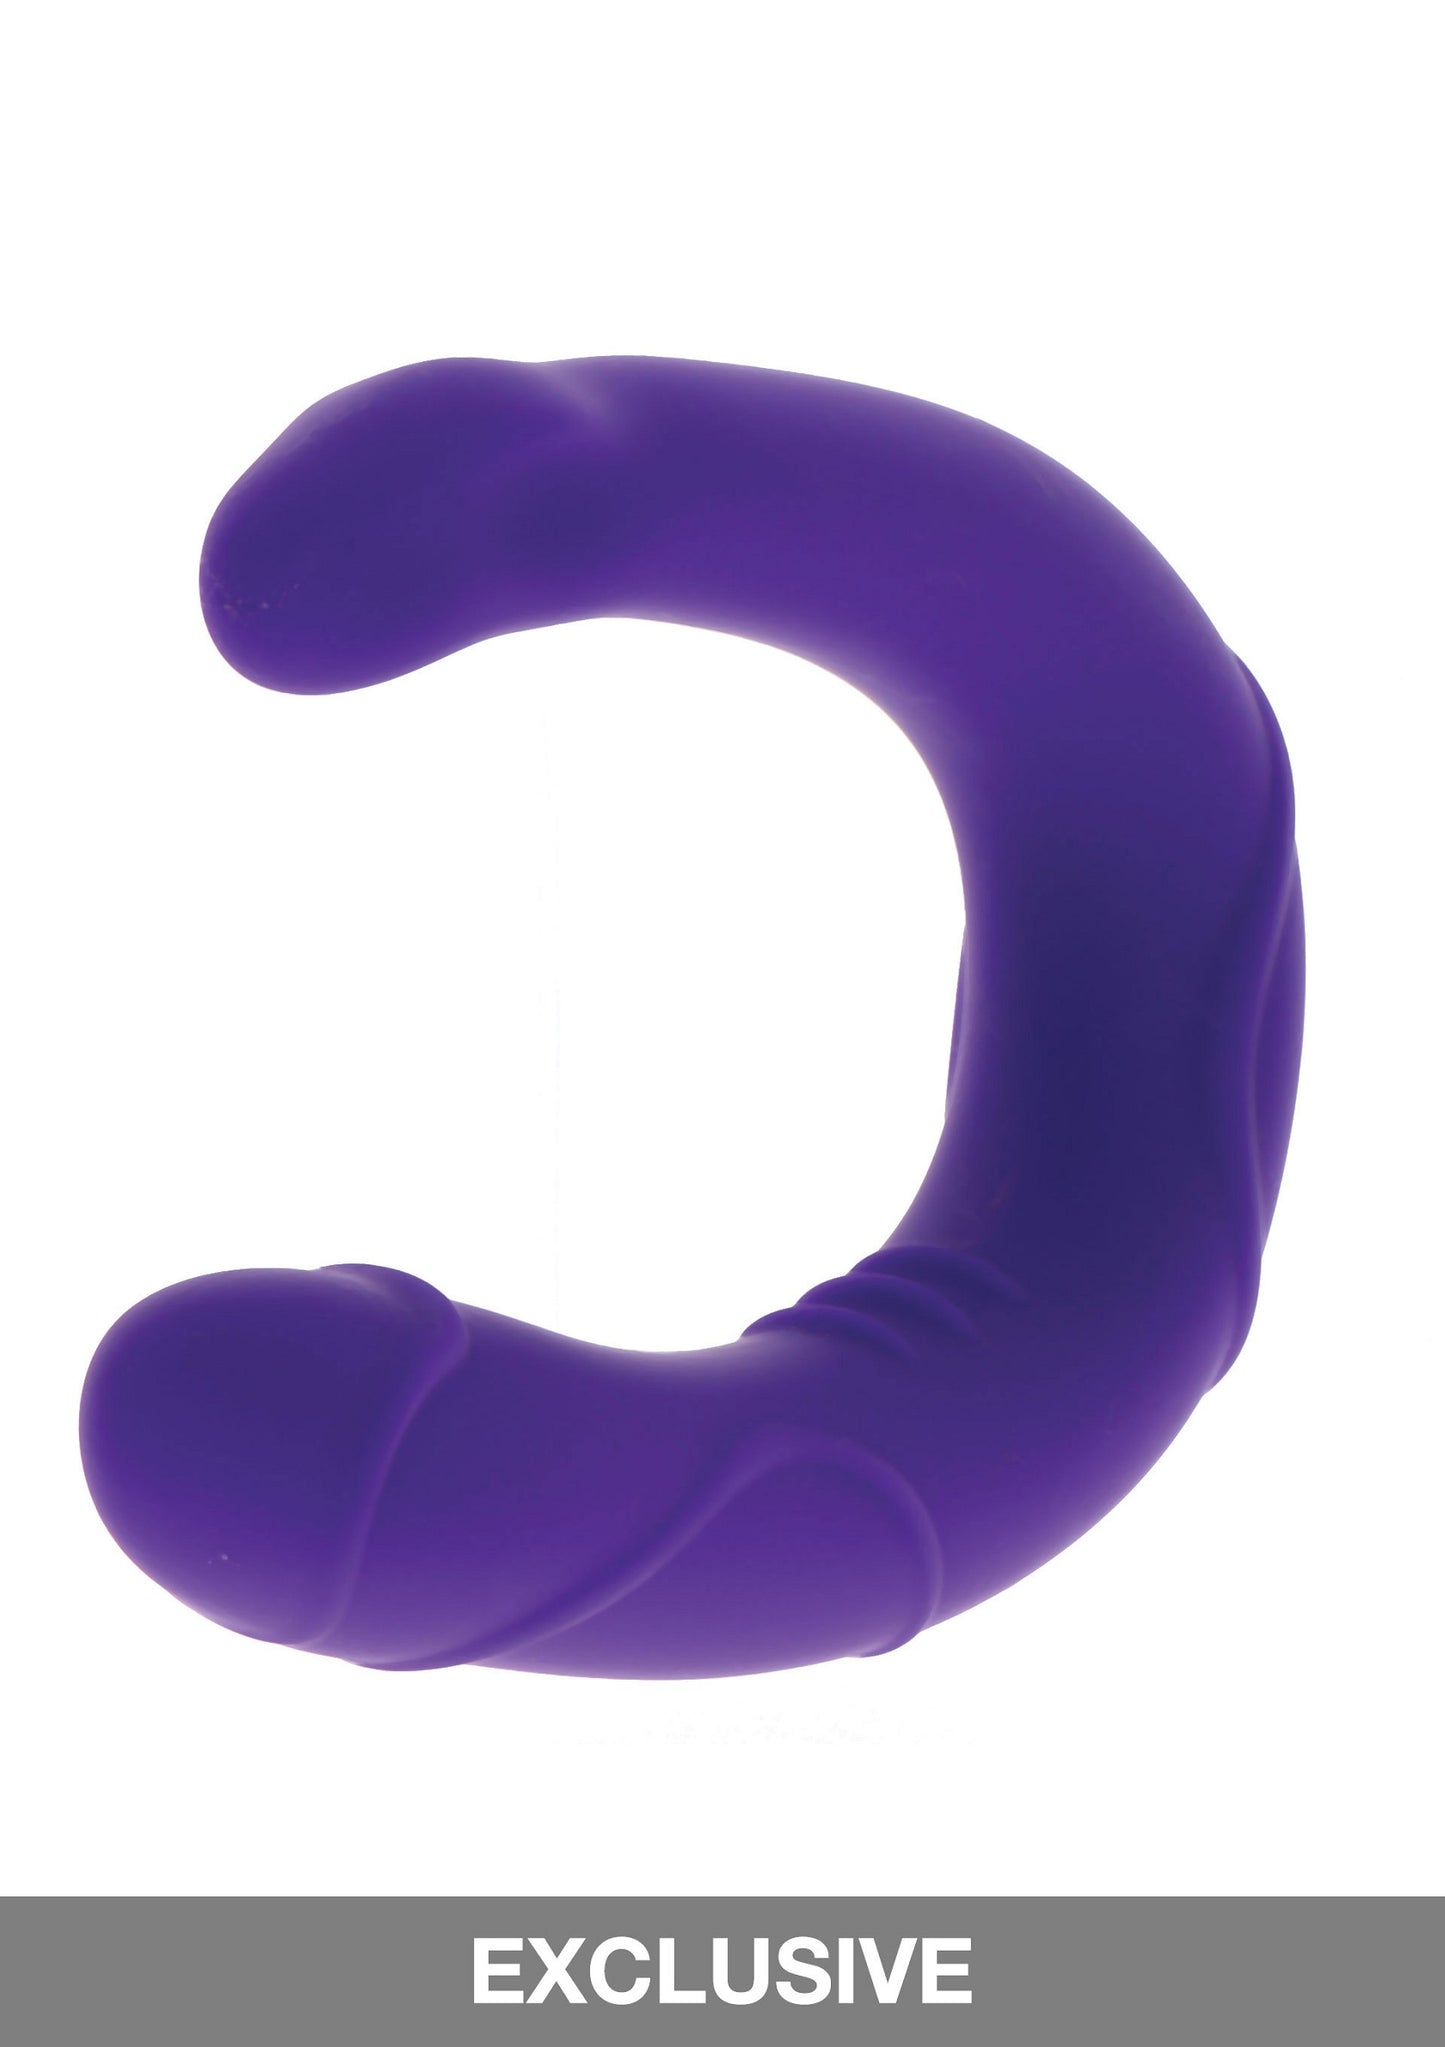 ToyJoy Get Real Vogue Mini Double Dong PURPLE - 6